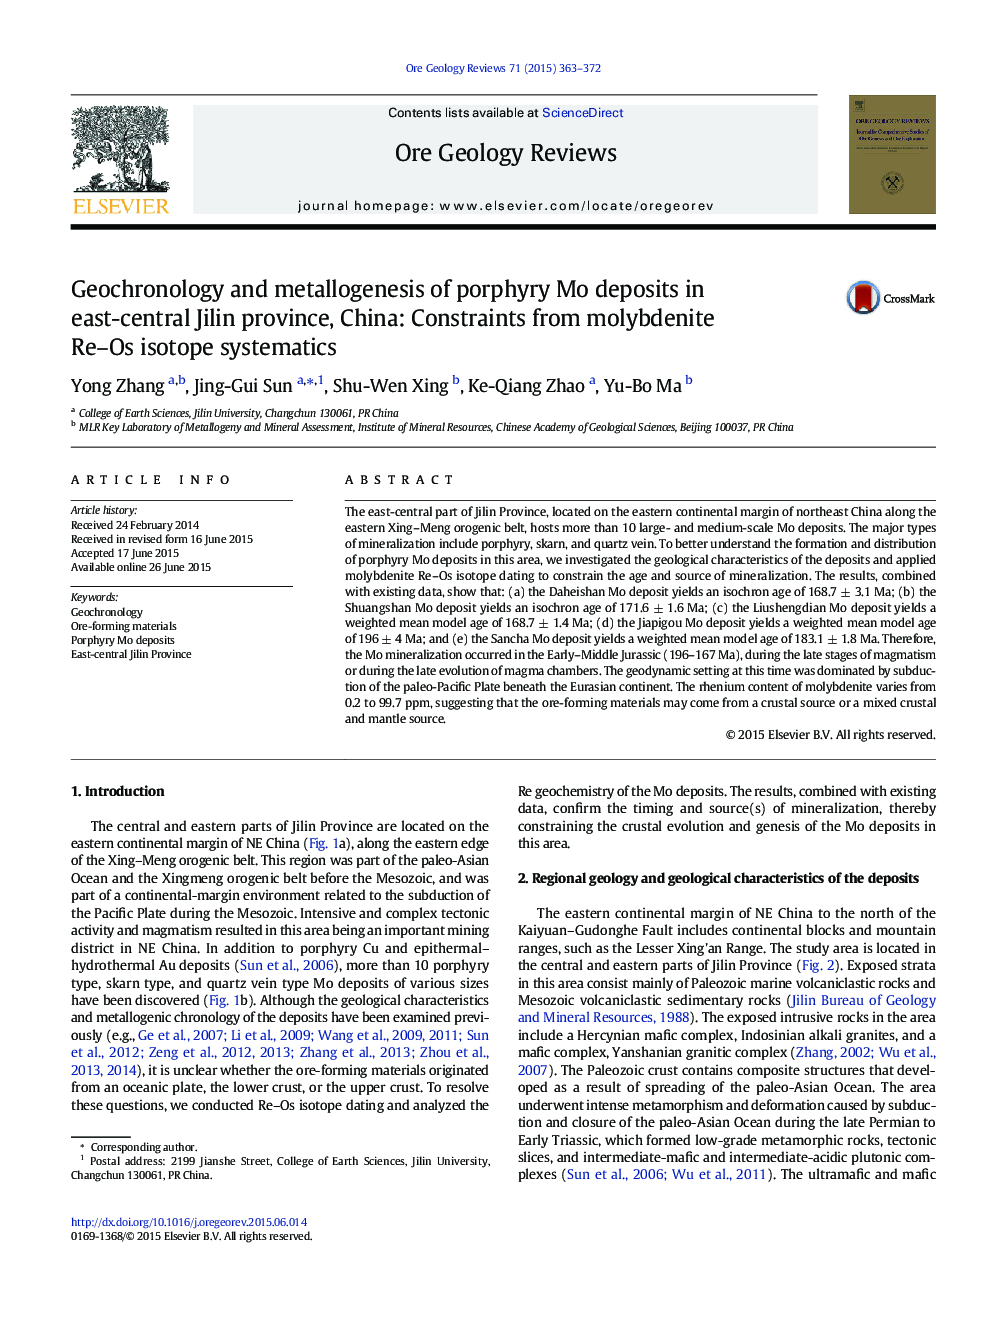 Geochronology and metallogenesis of porphyry Mo deposits in east-central Jilin province, China: Constraints from molybdenite Re–Os isotope systematics